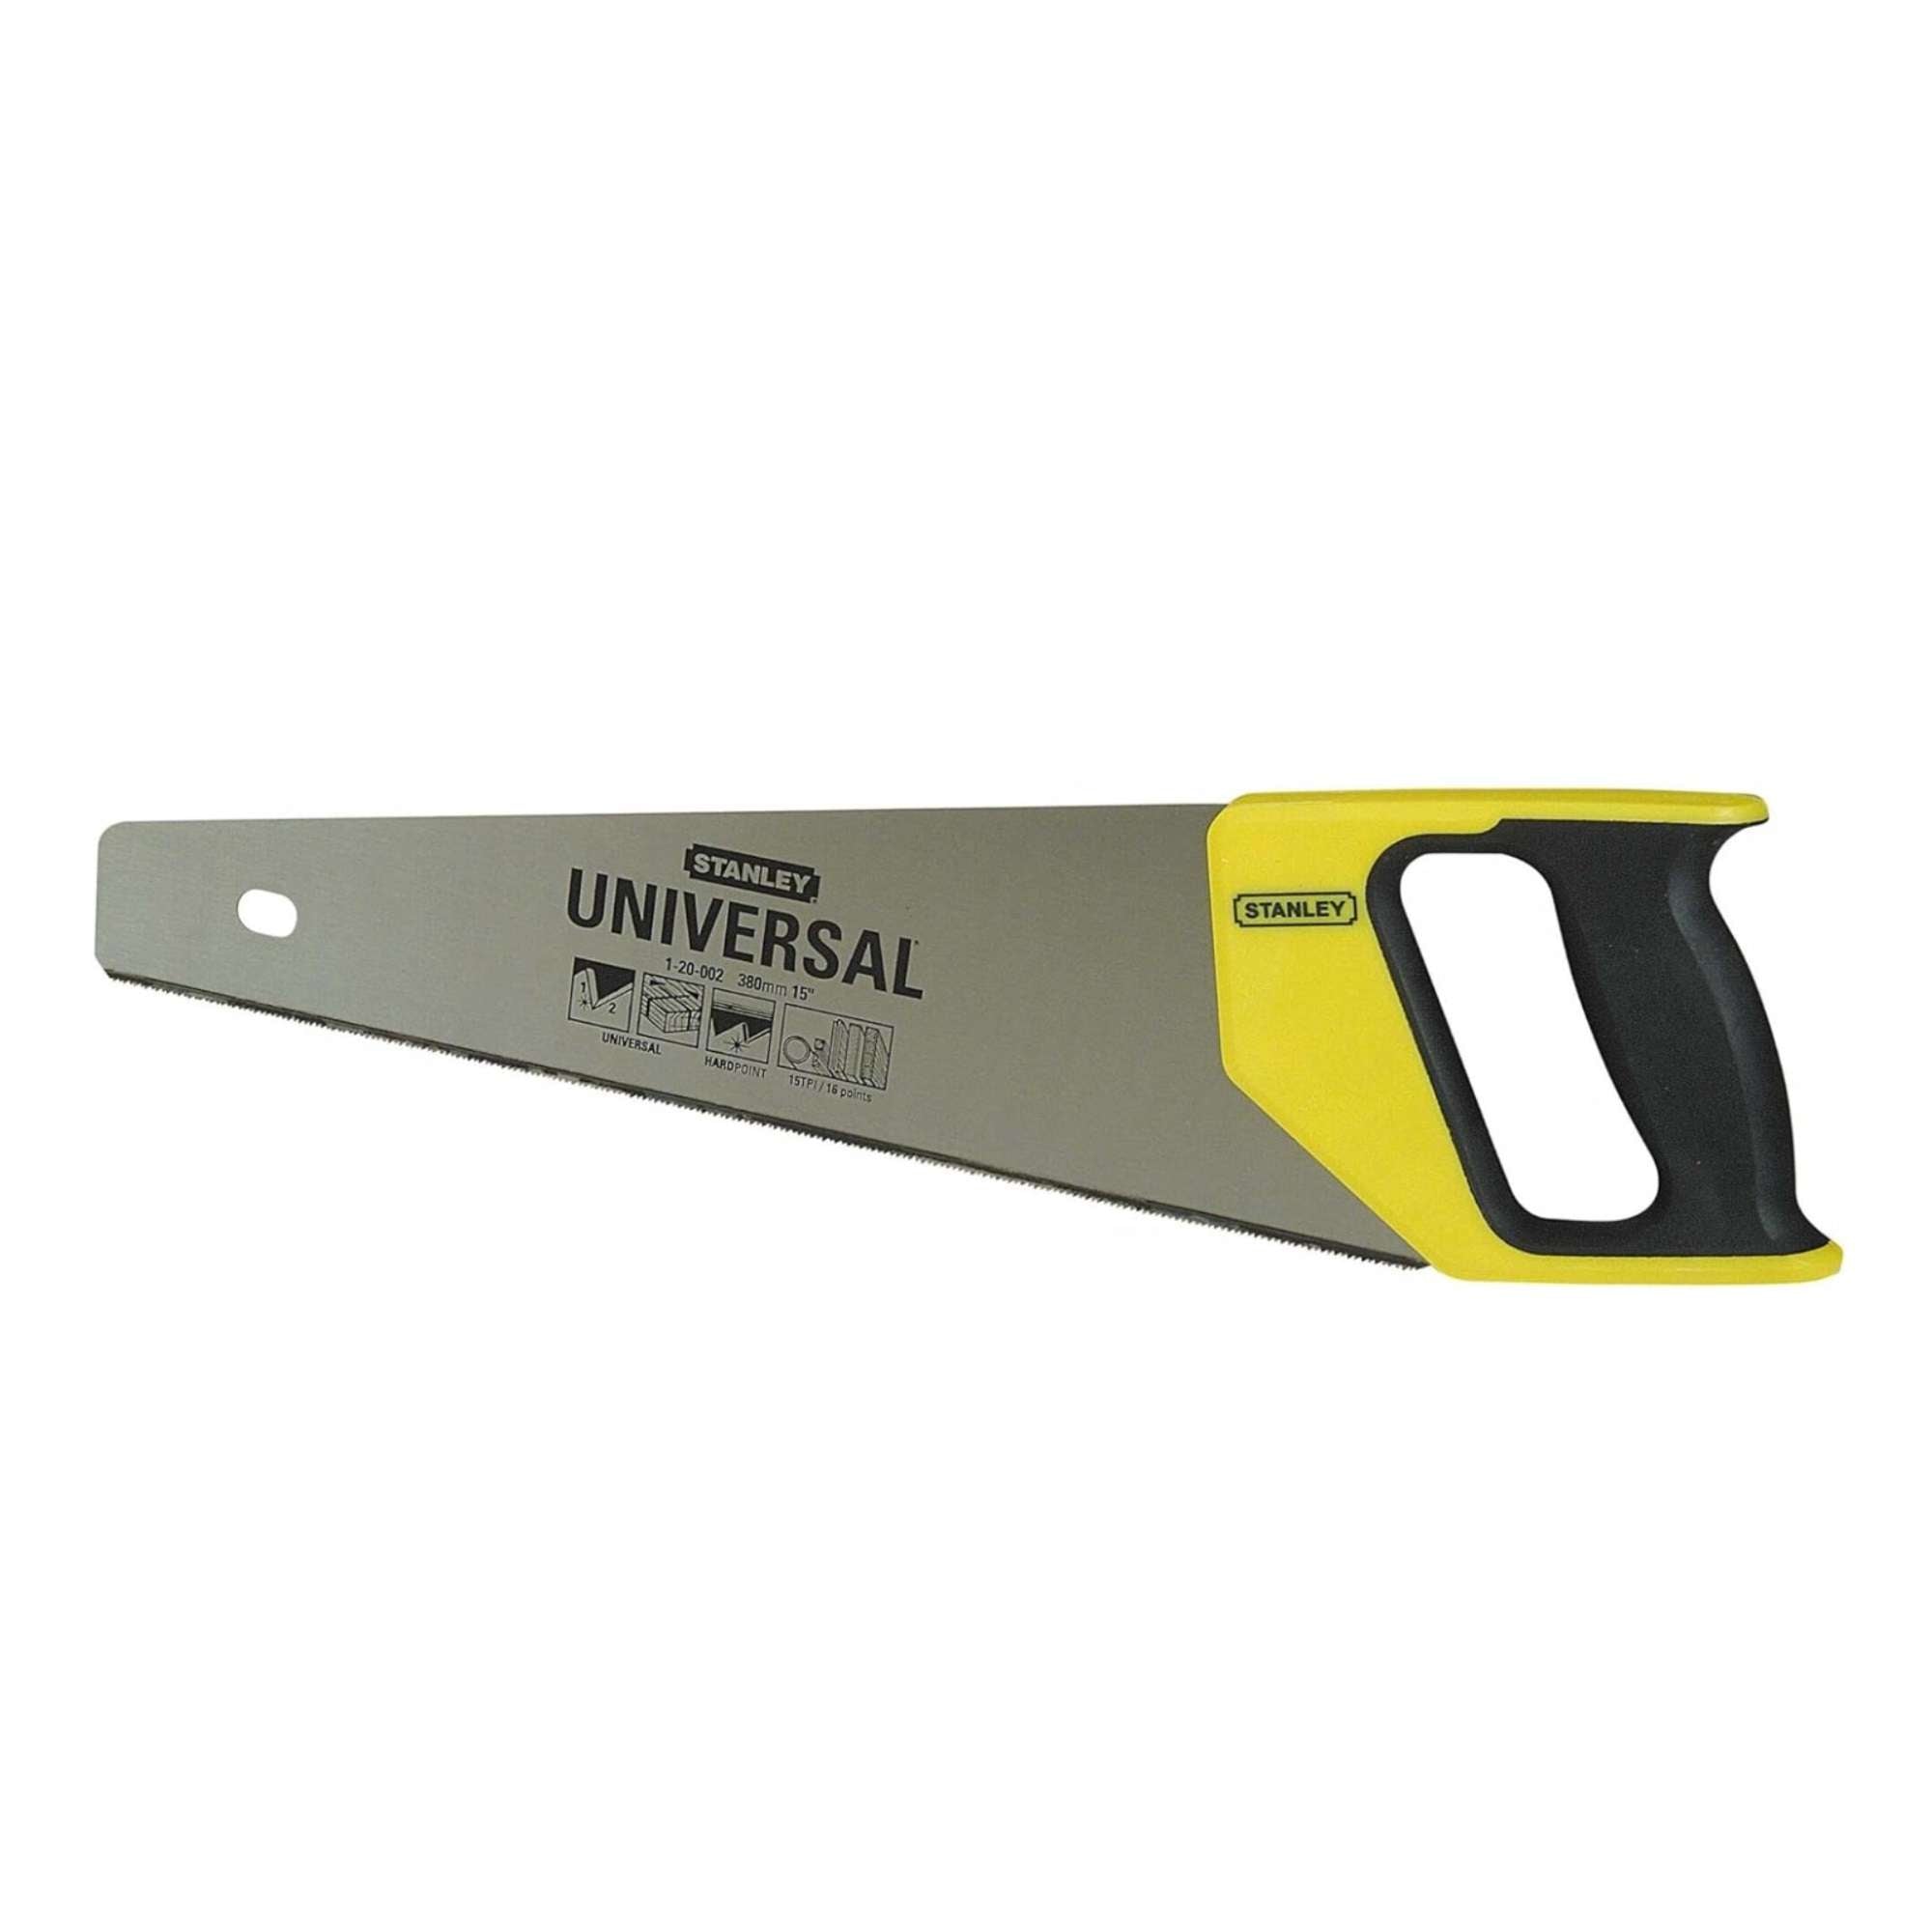 Universal Saw 380 mm 12 PT, Hand Saw - Stanley 1-20-002